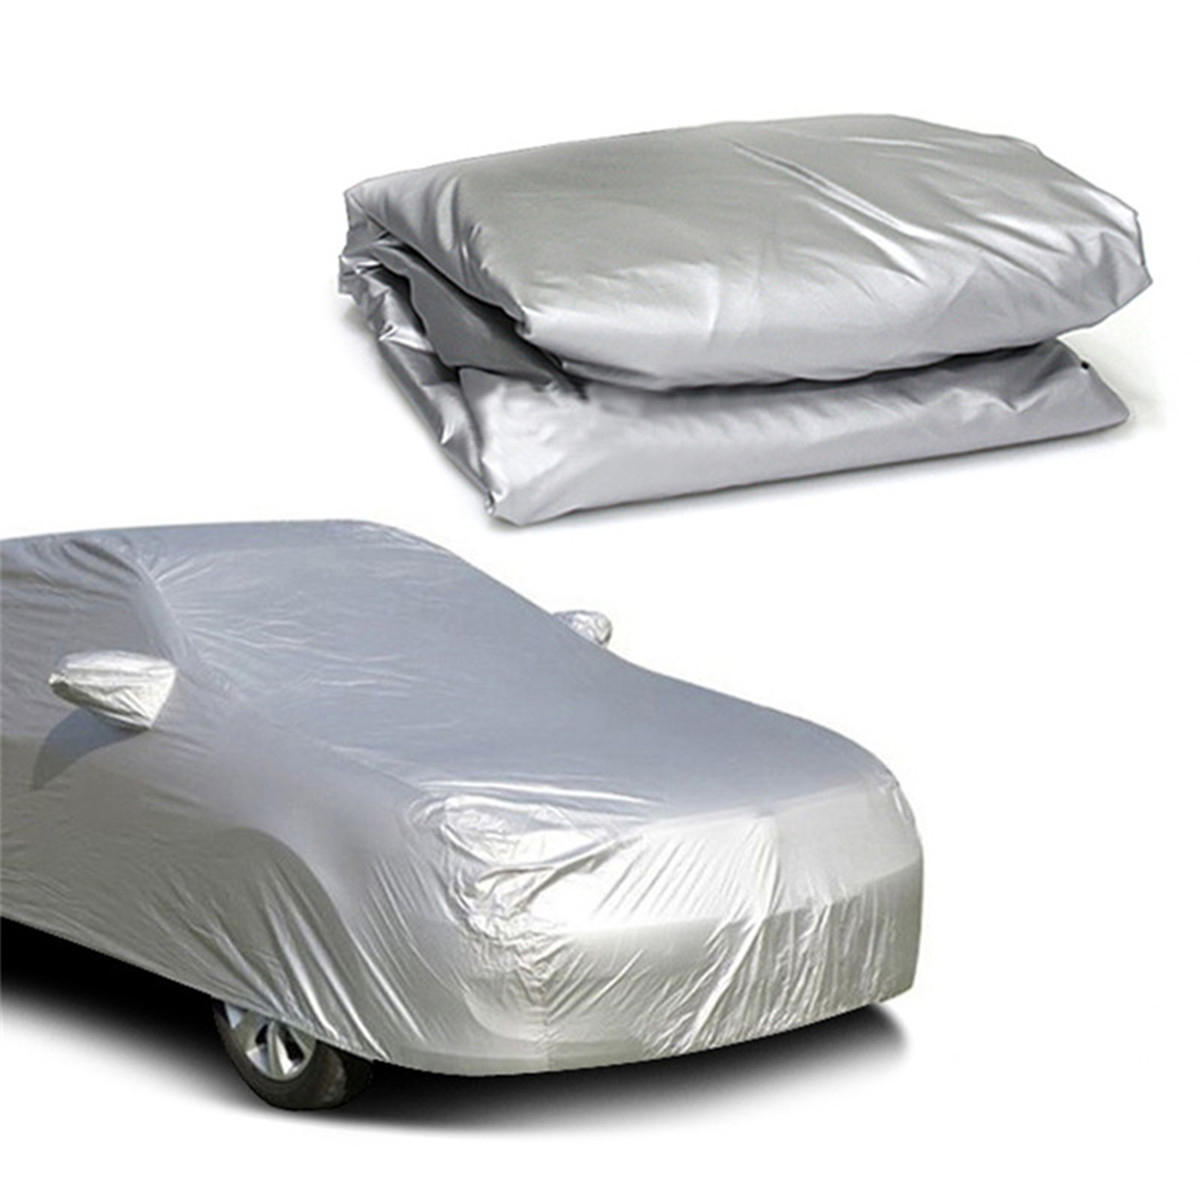 2 Layer Car Cover Soft Breathable Dust Proof Sun Uv Water Indoor Outdoor 2283